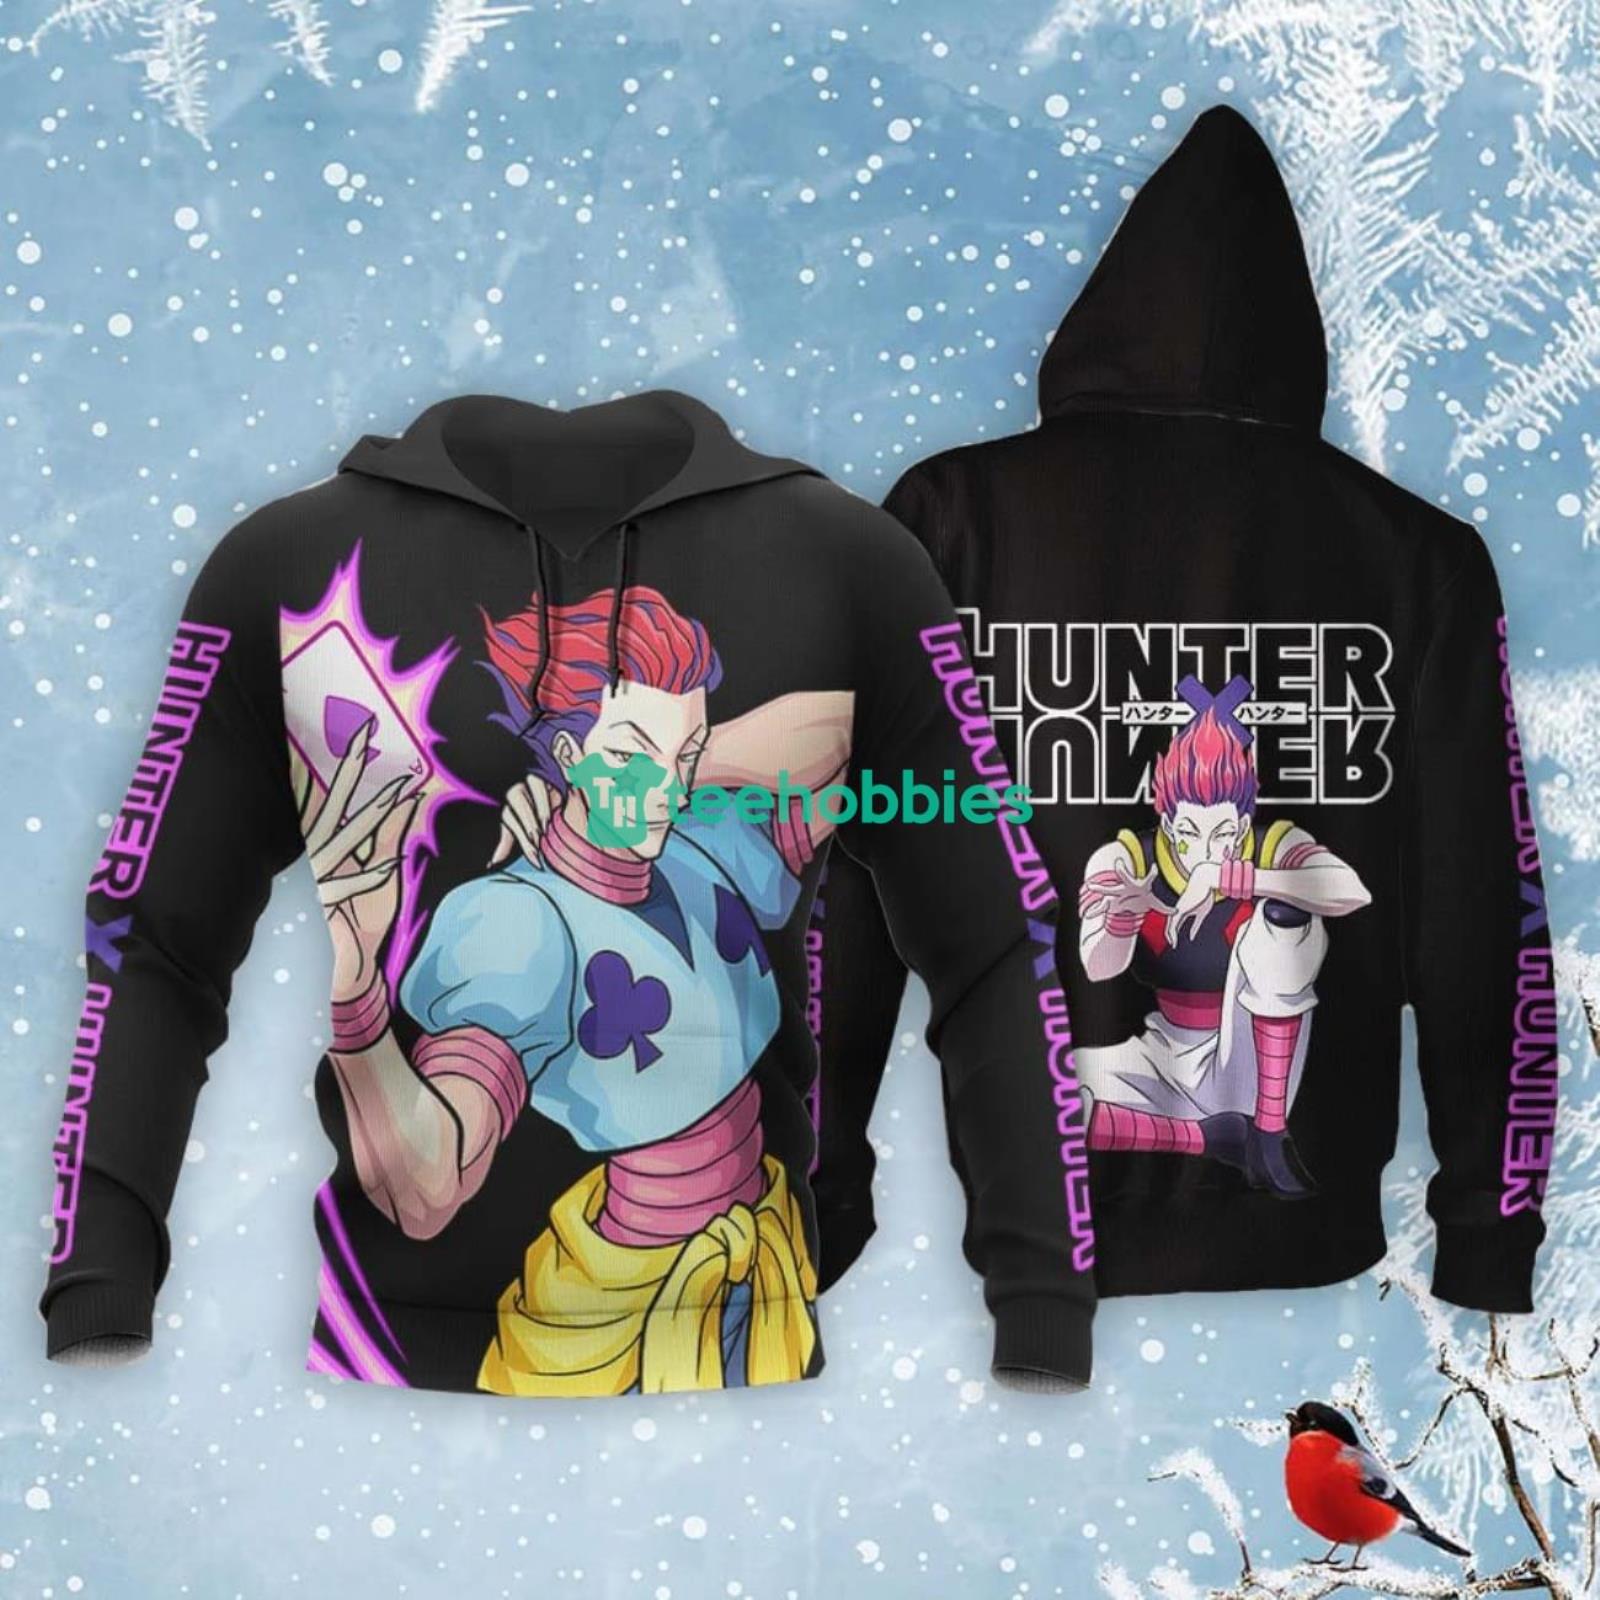 Hisoka All Over Printed 3D Shirt Custom Hunter And Hunter Anime Fans Product Photo 3 Product photo 2